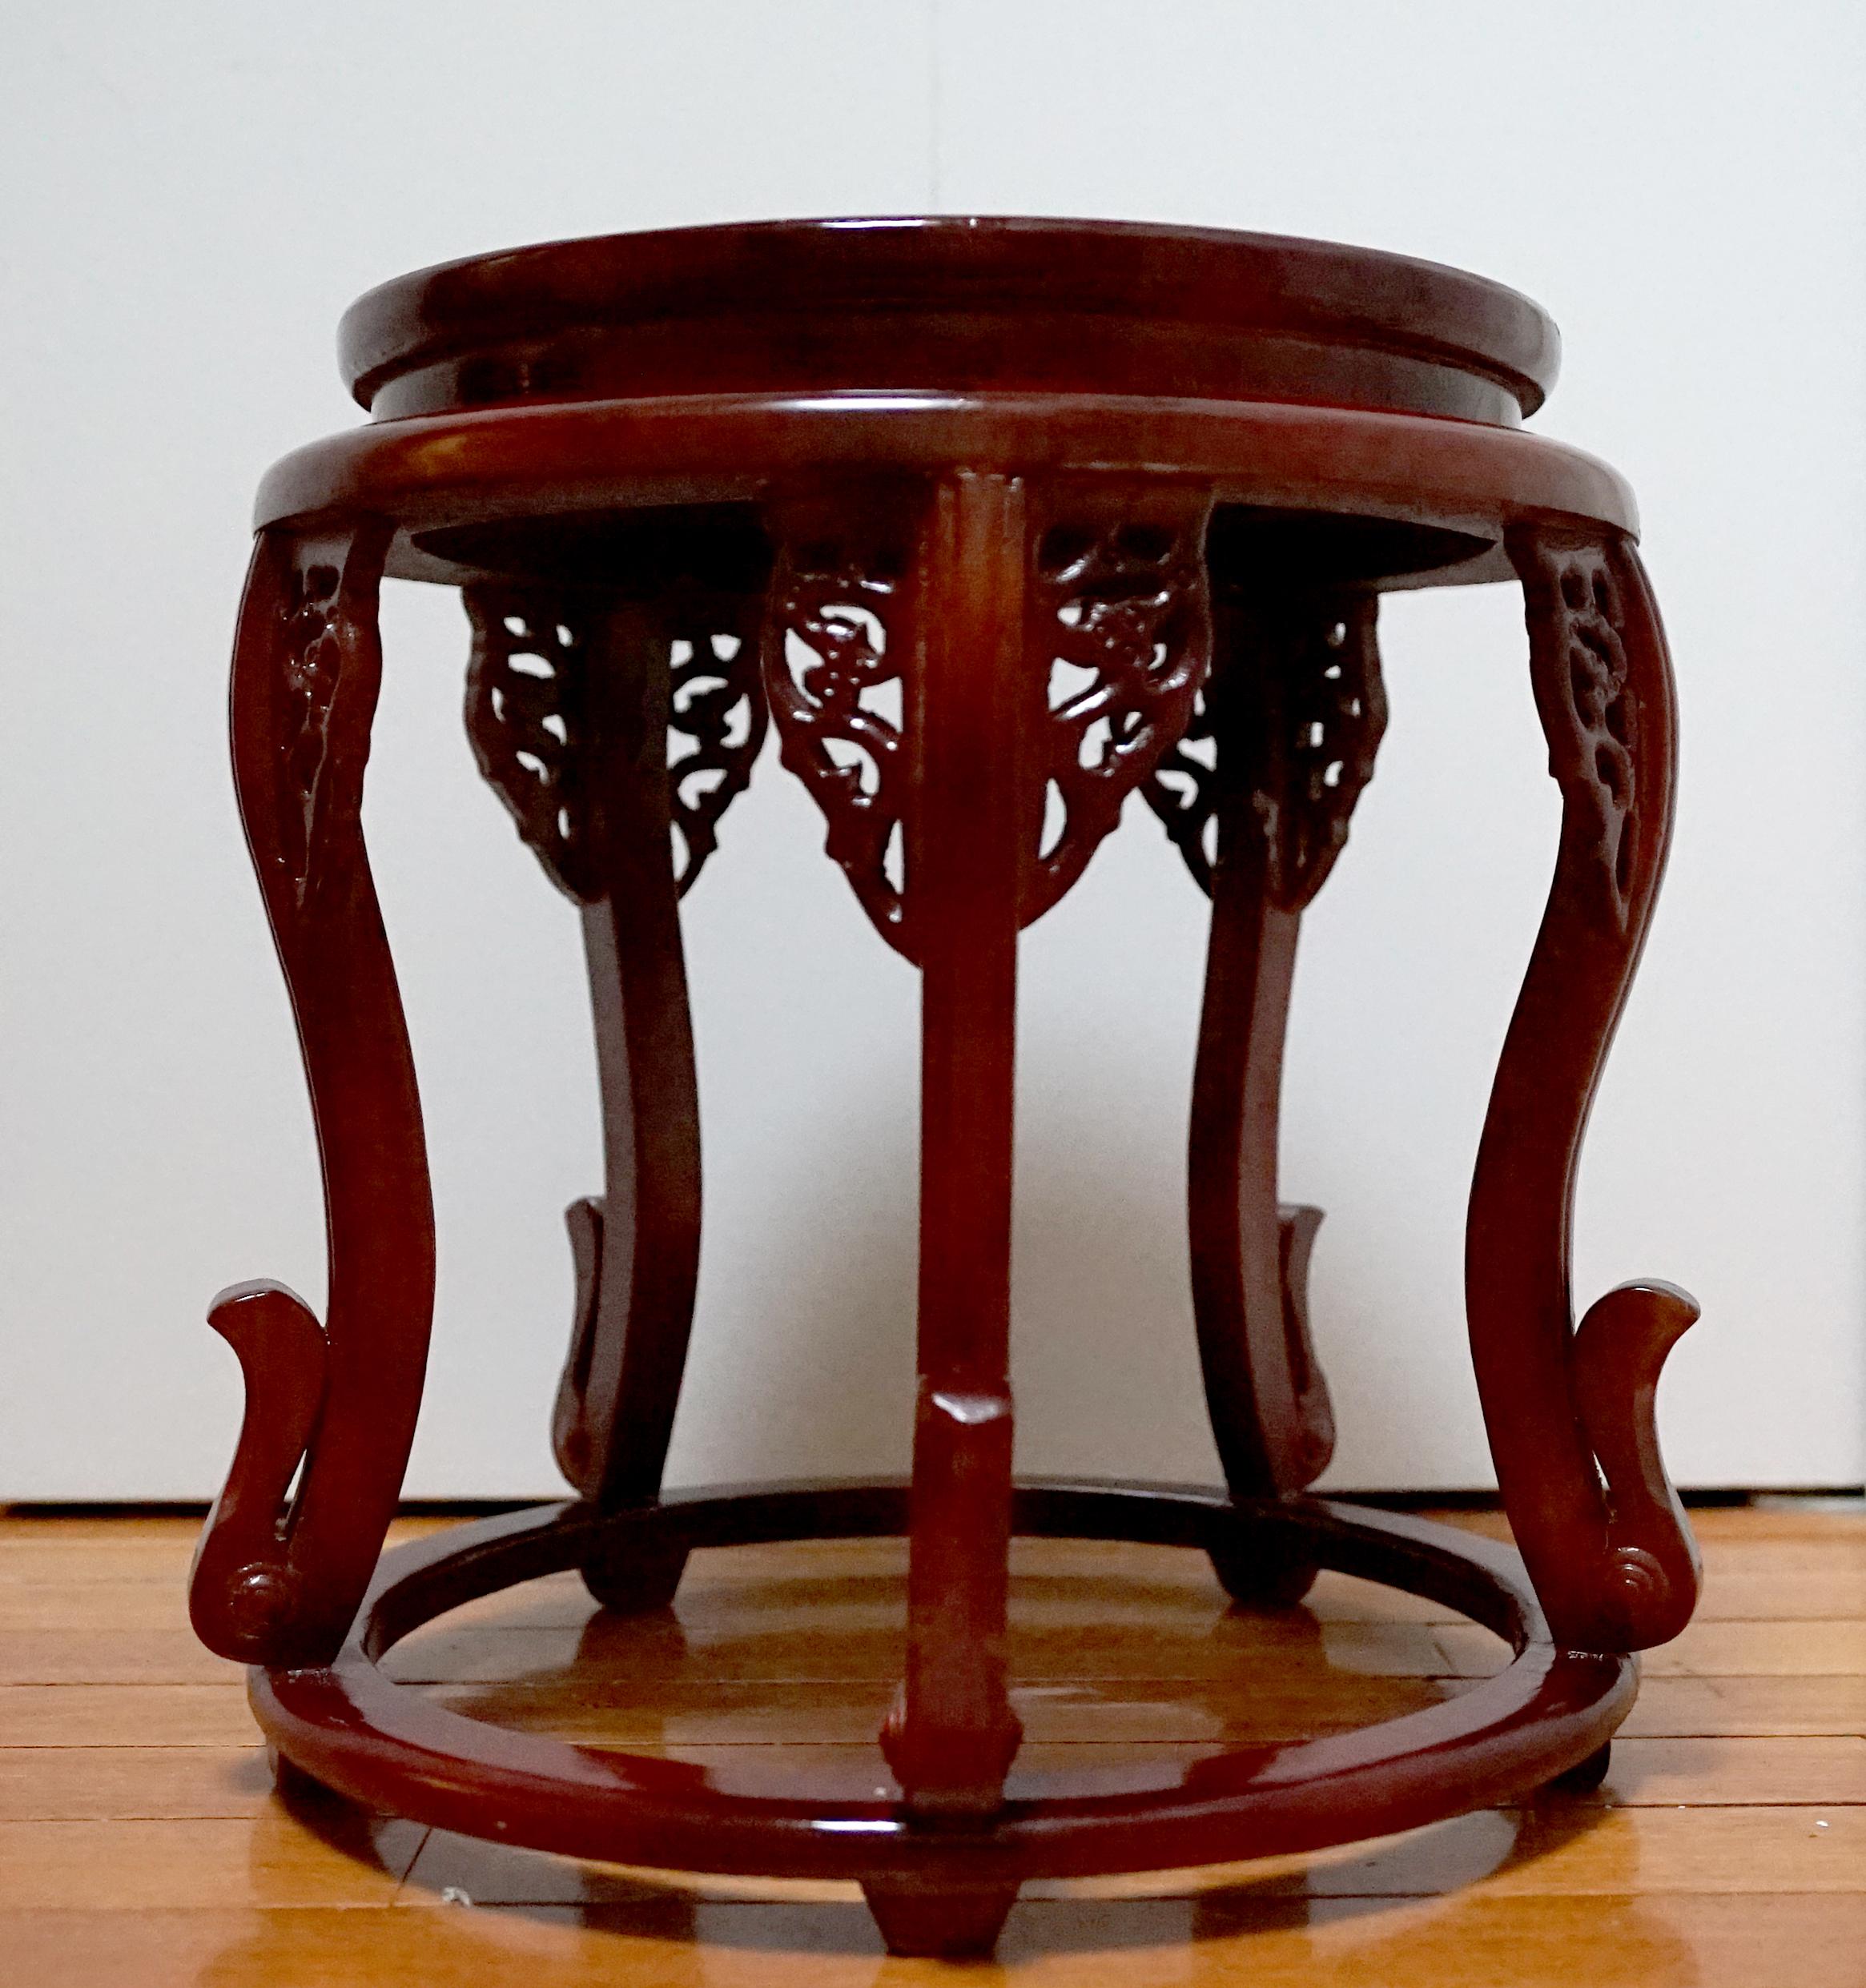 The form of this rosewood circular table with delicate fretwork and graceful legs is rare and worth a second look. The outstanding feature aside from the design details is the dark cherry-colored patina that can only come with age. The wood tone is